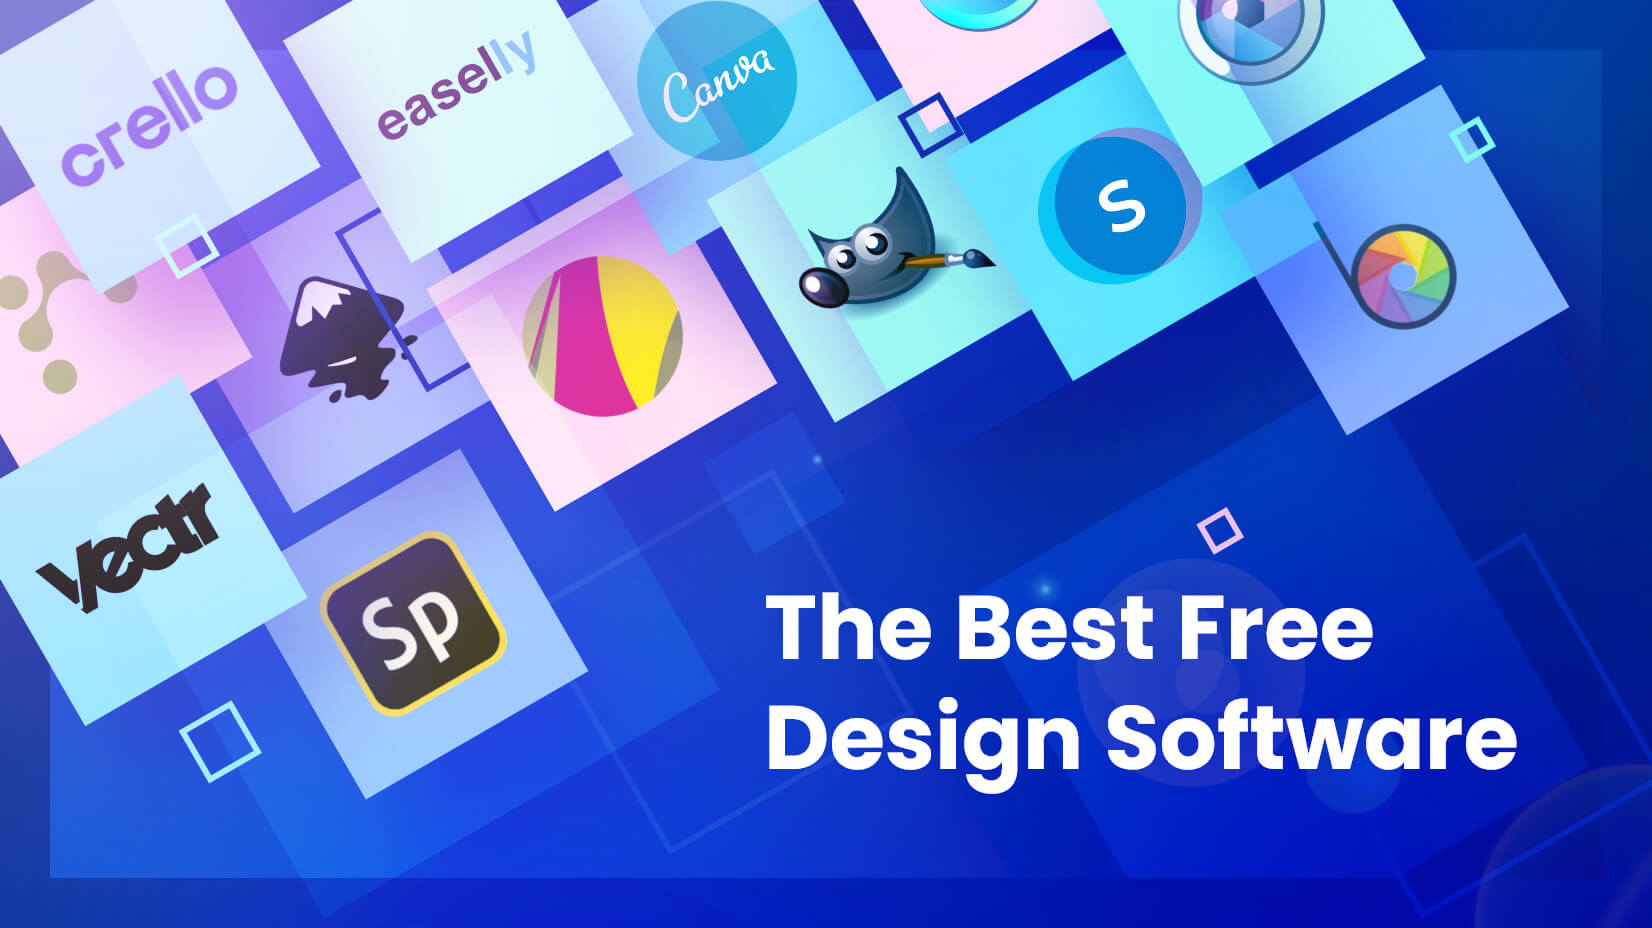 Free Design Tools Offered by Pikbest